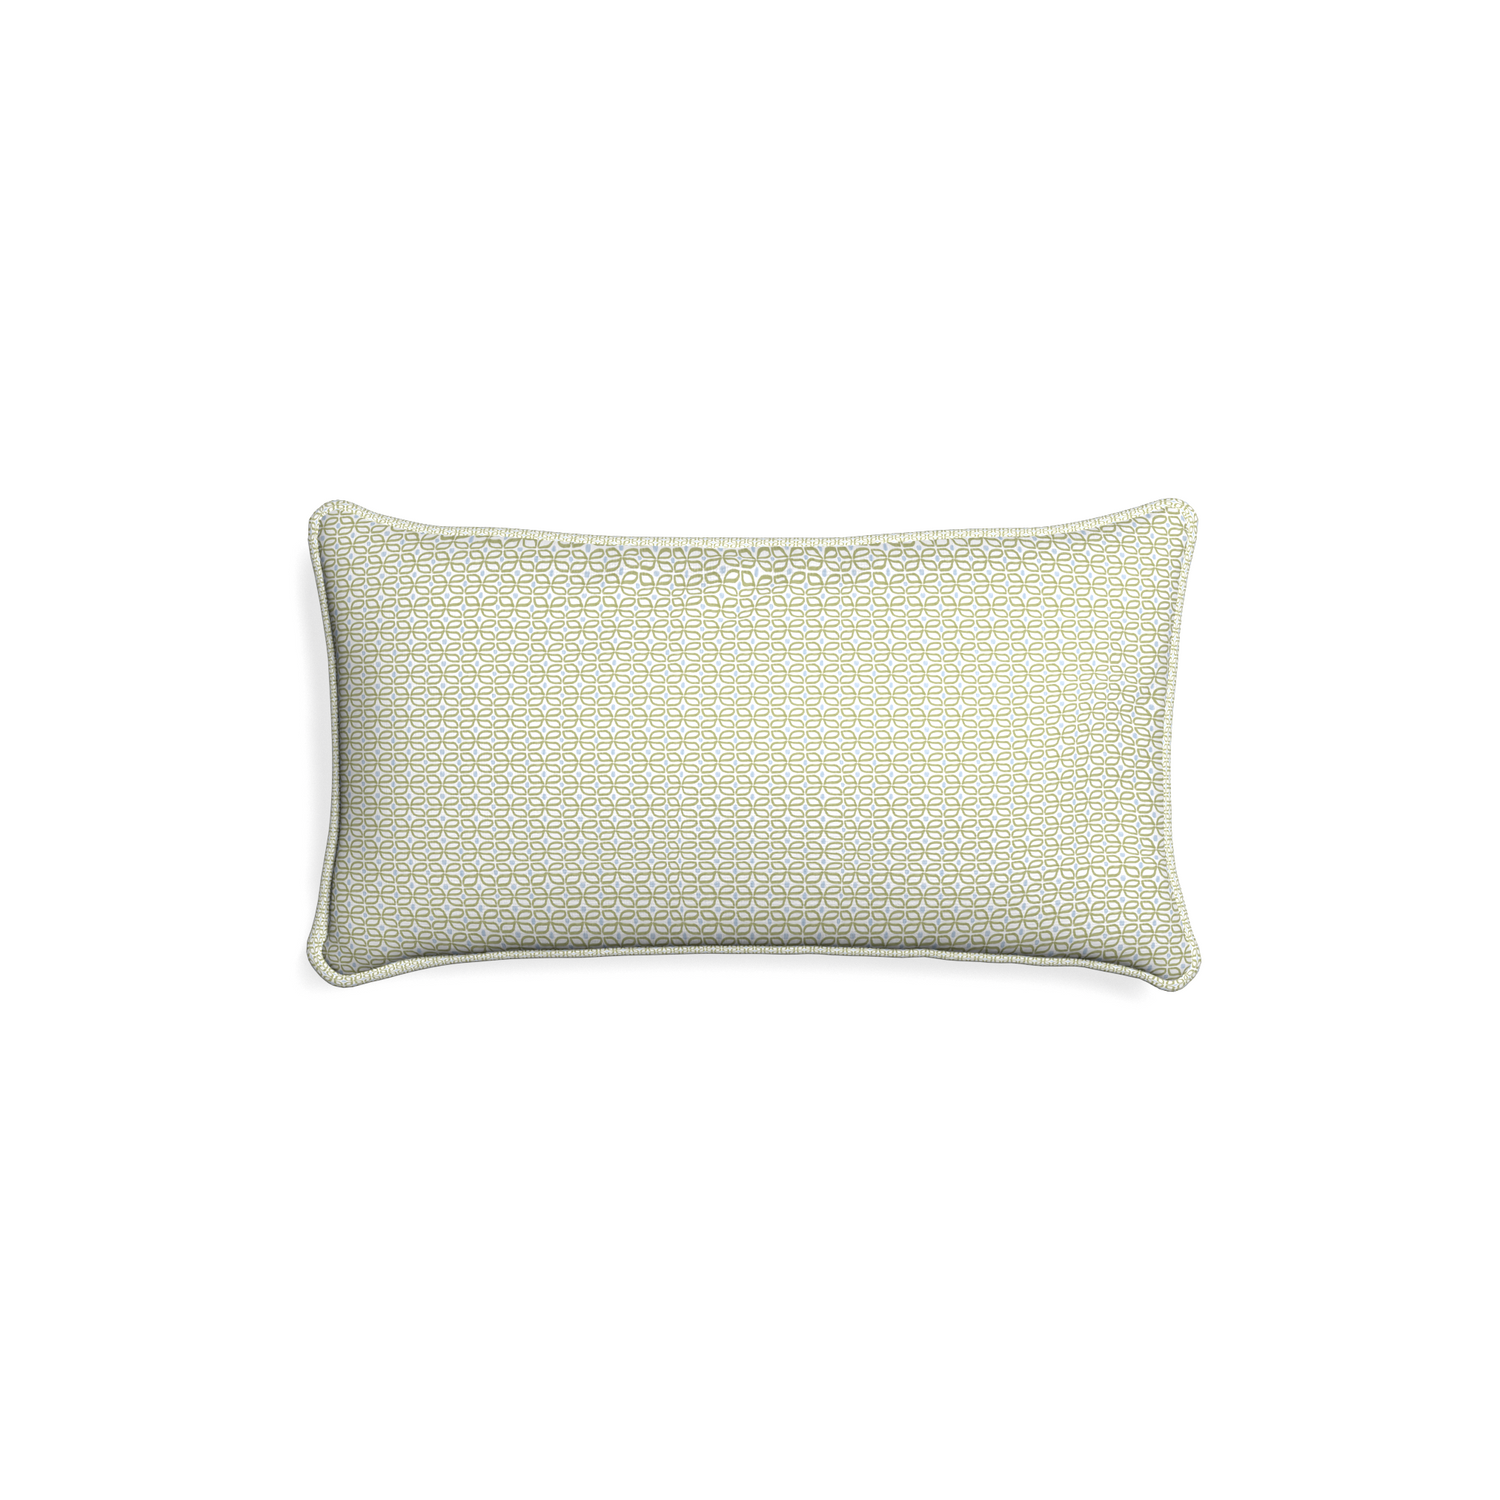 Petite-lumbar loomi moss custom moss green geometricpillow with l piping on white background